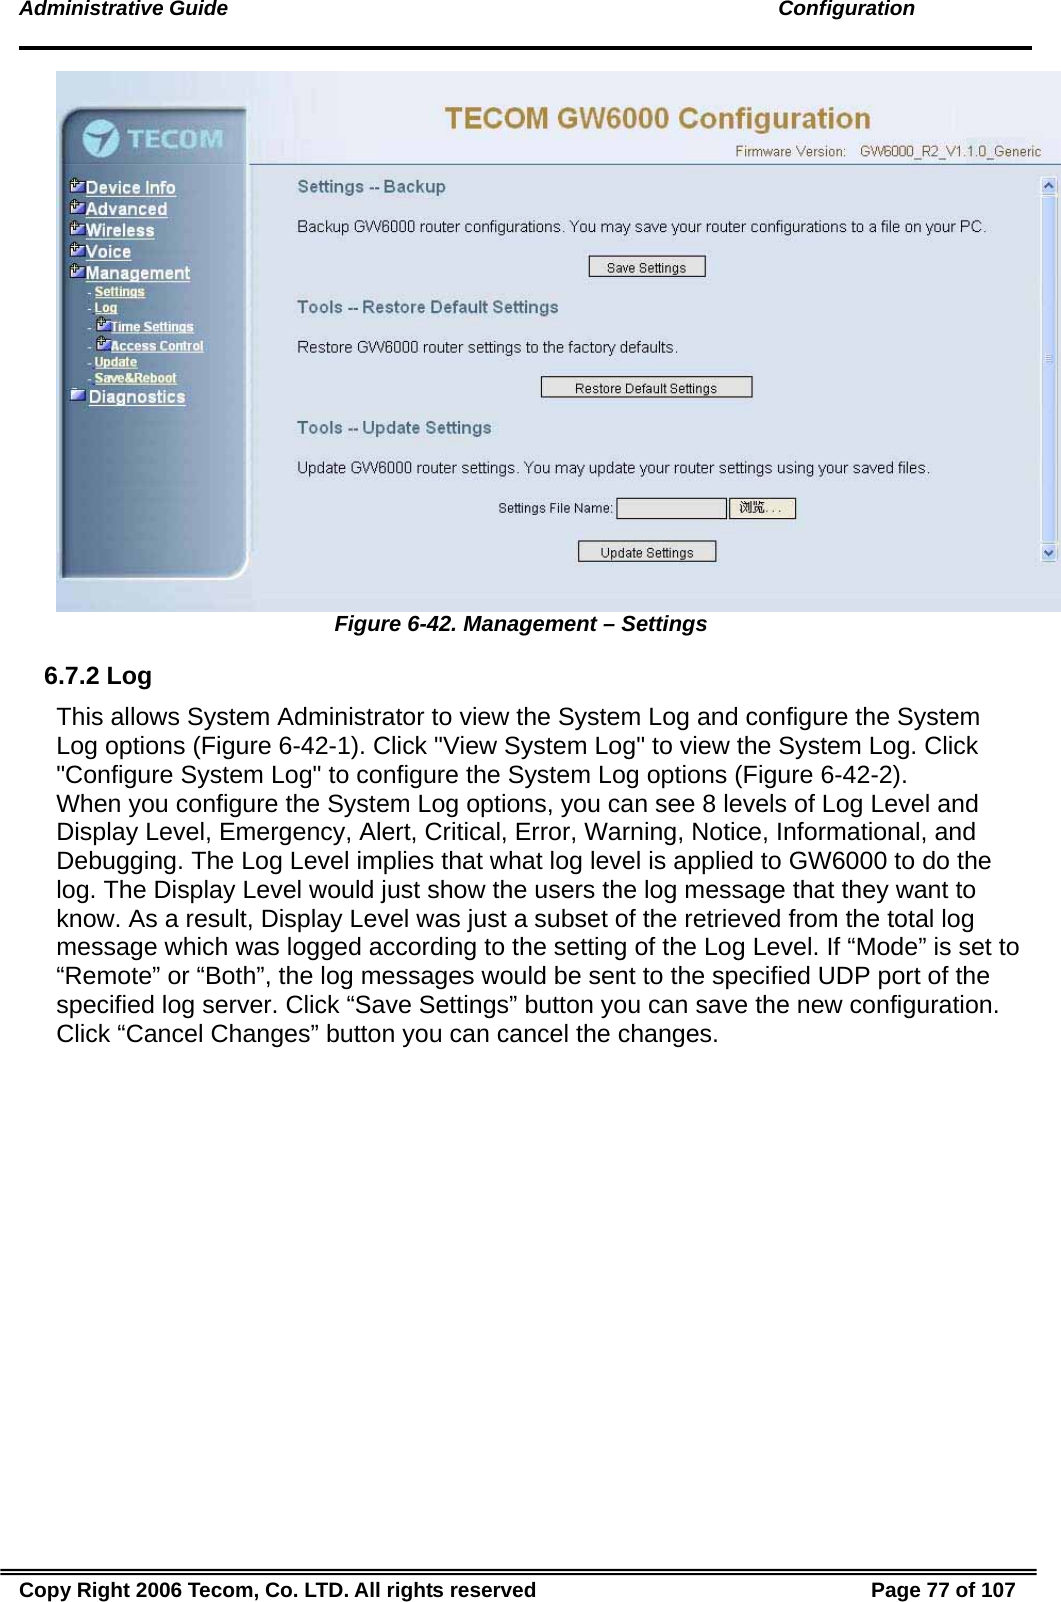 Administrative Guide                                                                                               Configuration  Figure 6-42. Management – Settings 6.7.2 Log This allows System Administrator to view the System Log and configure the System Log options (Figure 6-42-1). Click &quot;View System Log&quot; to view the System Log. Click &quot;Configure System Log&quot; to configure the System Log options (Figure 6-42-2).   When you configure the System Log options, you can see 8 levels of Log Level and Display Level, Emergency, Alert, Critical, Error, Warning, Notice, Informational, and Debugging. The Log Level implies that what log level is applied to GW6000 to do the log. The Display Level would just show the users the log message that they want to know. As a result, Display Level was just a subset of the retrieved from the total log message which was logged according to the setting of the Log Level. If “Mode” is set to “Remote” or “Both”, the log messages would be sent to the specified UDP port of the specified log server. Click “Save Settings” button you can save the new configuration. Click “Cancel Changes” button you can cancel the changes.  Copy Right 2006 Tecom, Co. LTD. All rights reserved  Page 77 of 107 